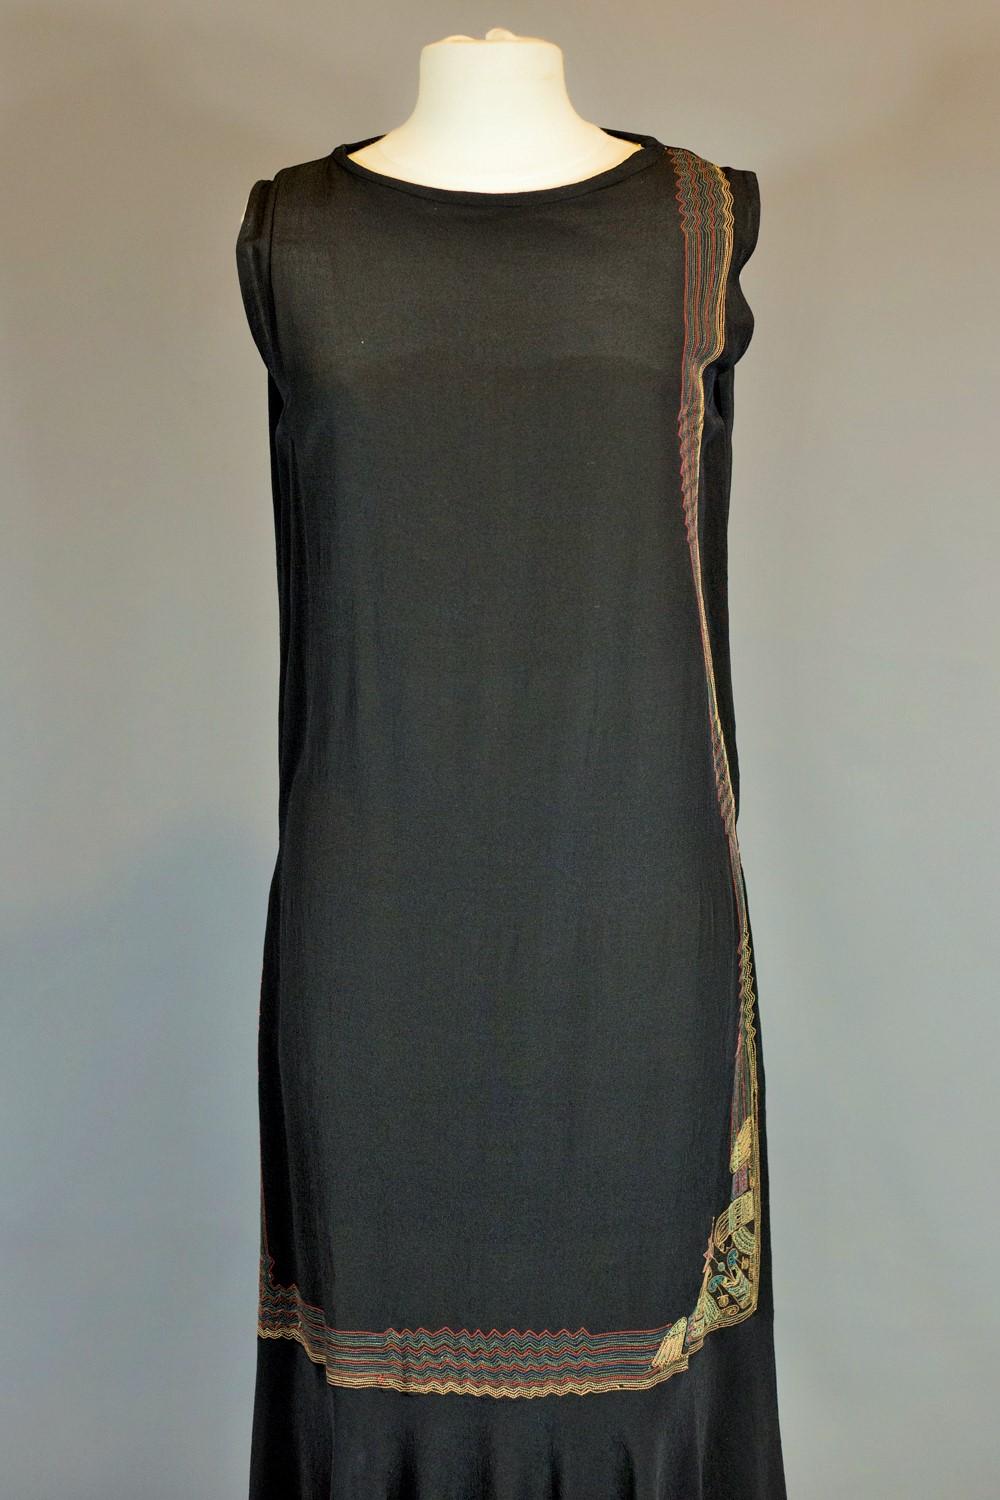 Women's A French Egyptomania Dress In Embroidered Black Crepe silk- Circa 1930 For Sale